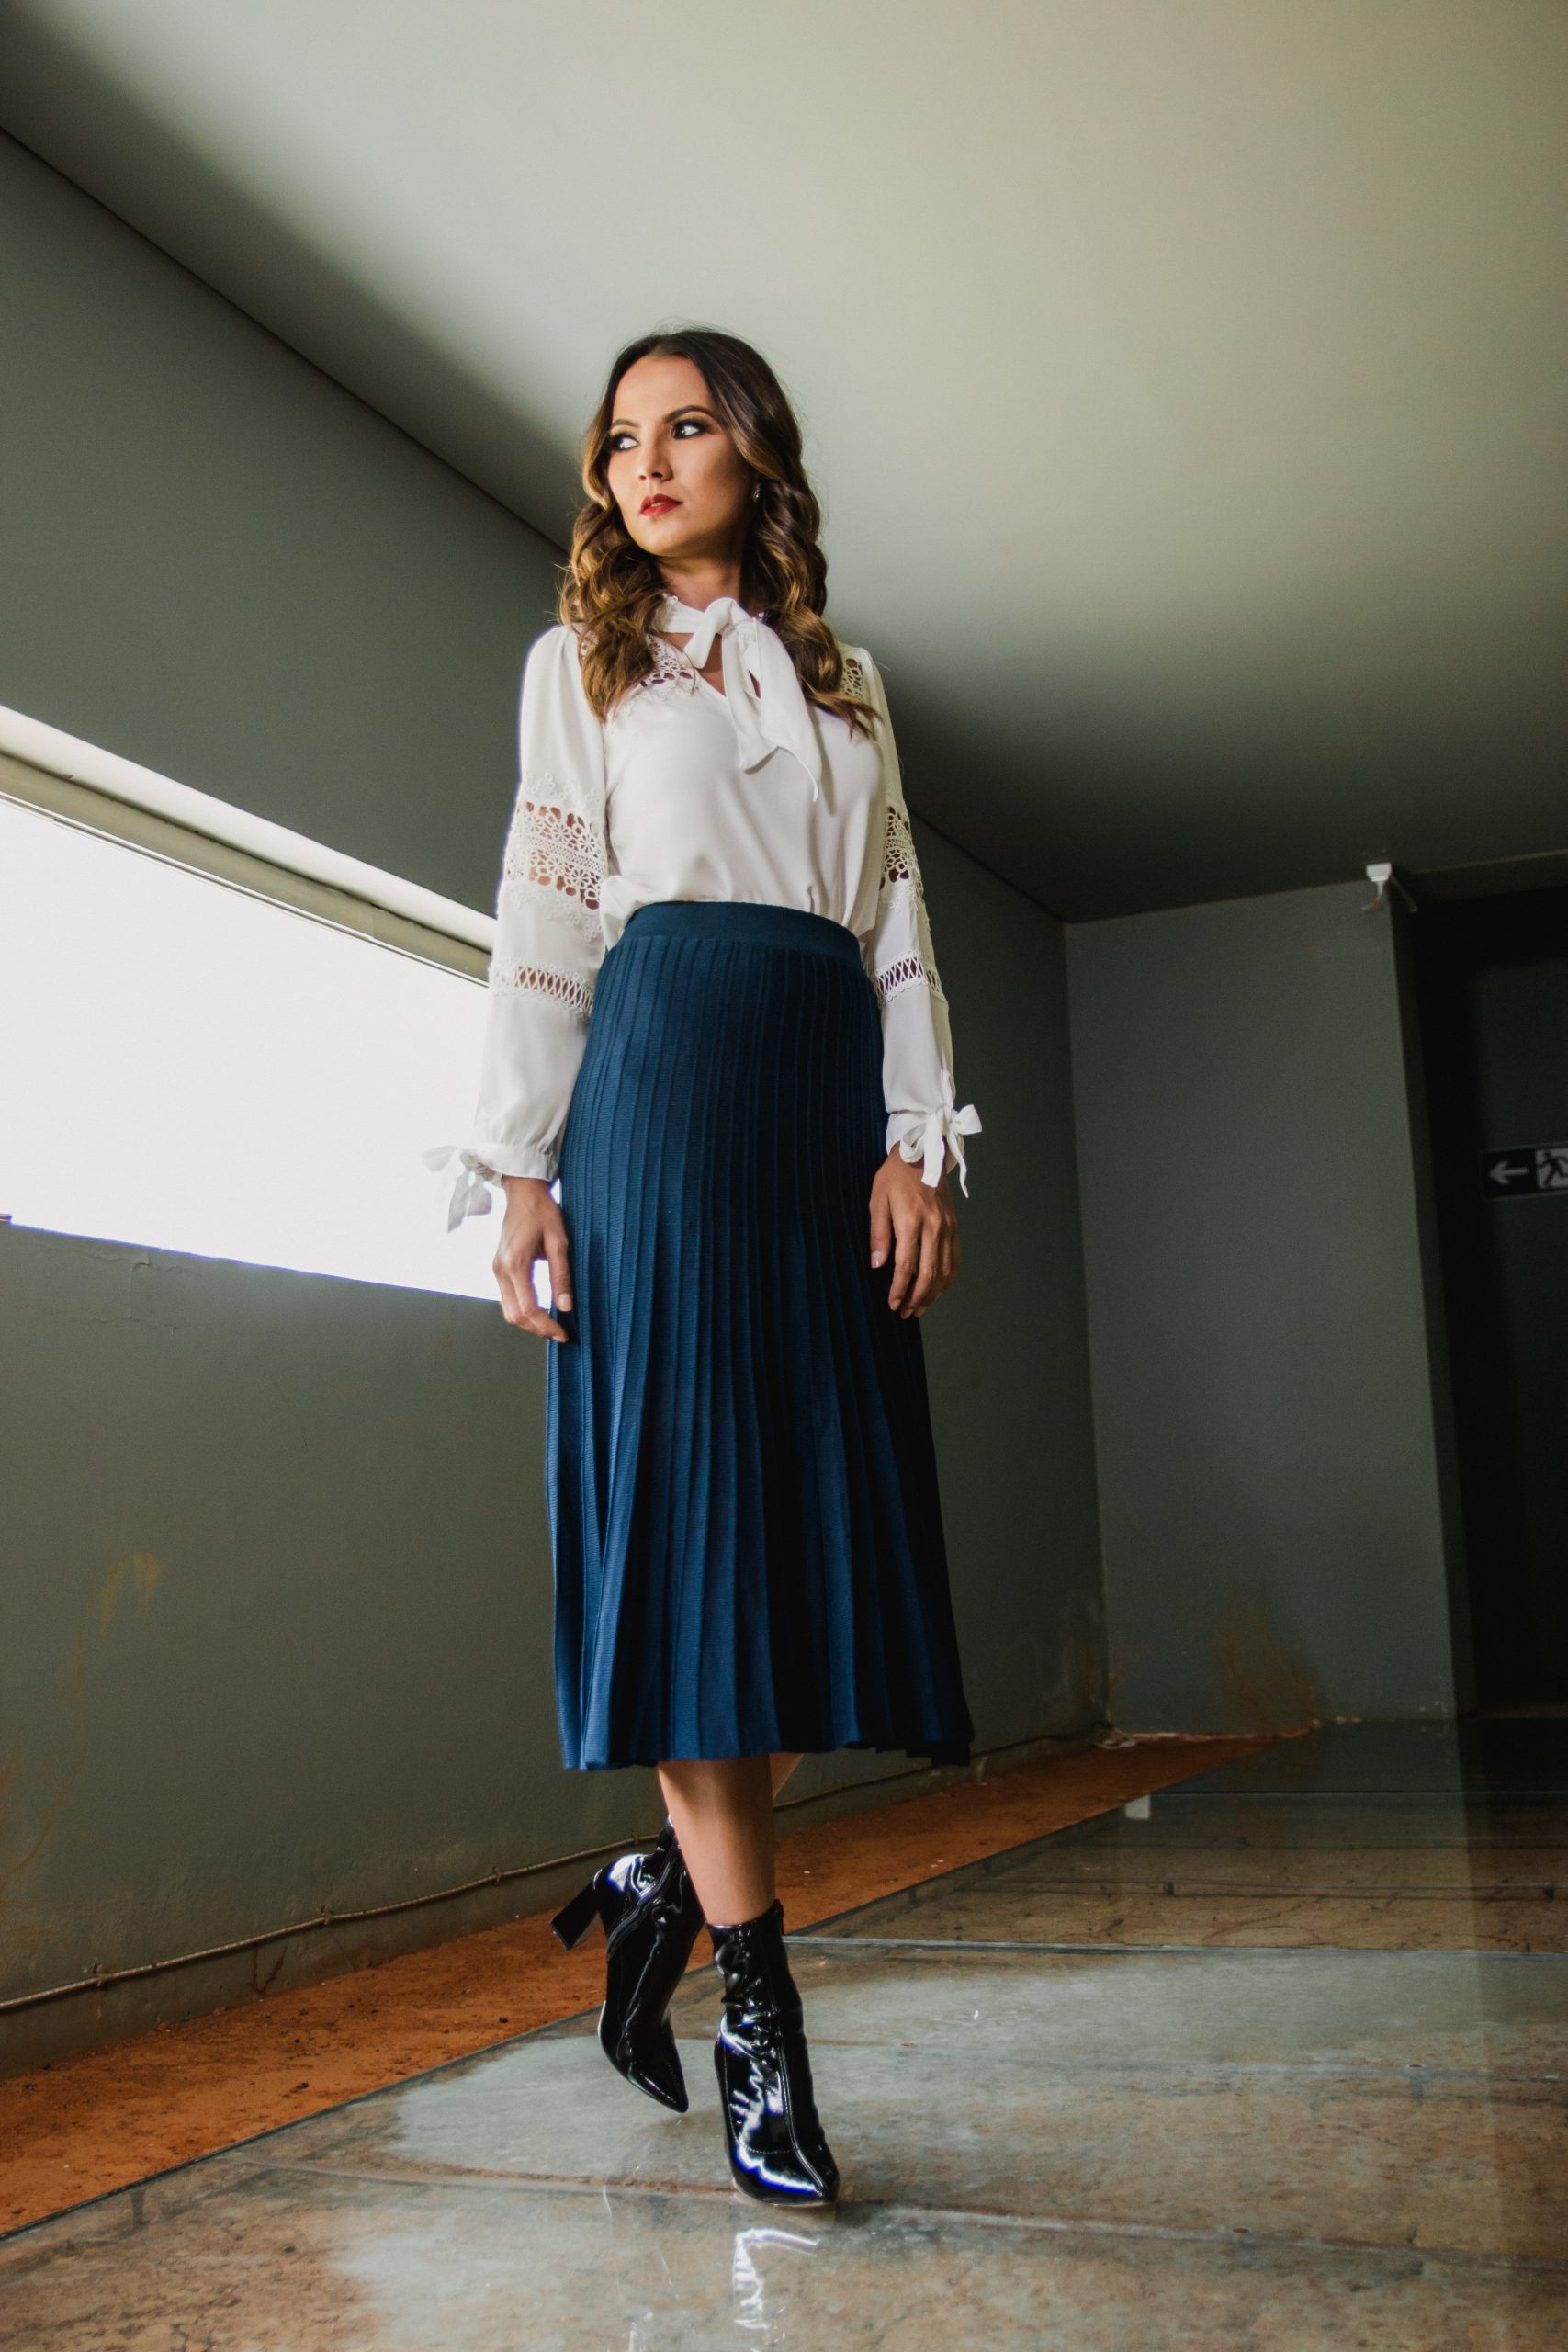 5 fashionable skirts for fall. Check which model will suit your figure best